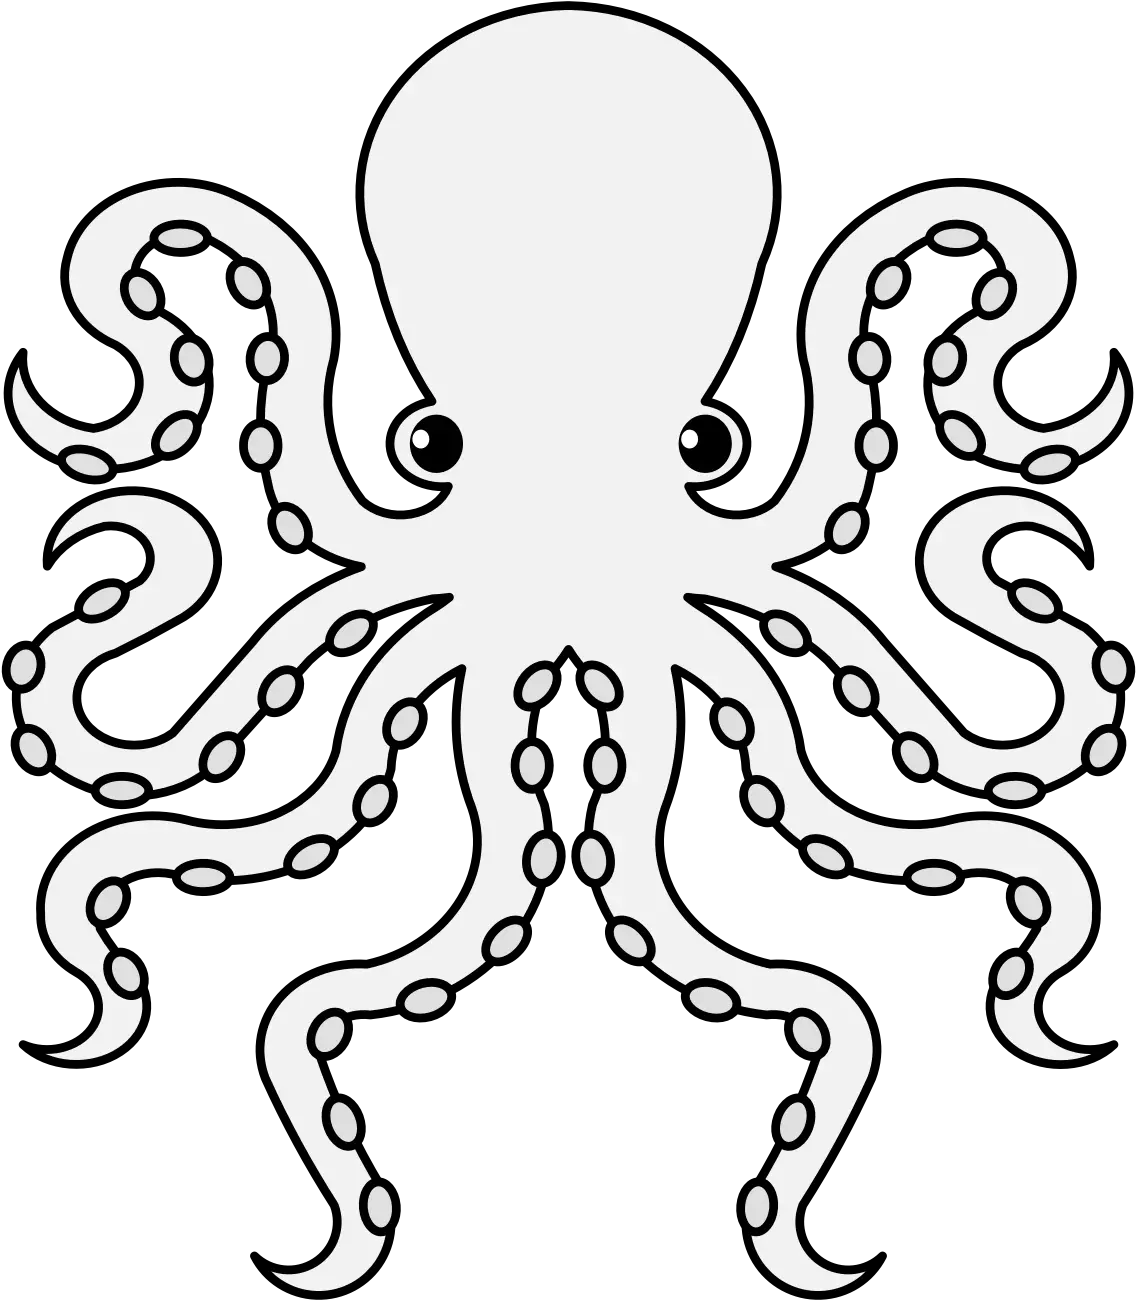 Octopus Png Image With No Background Octopus Traceable Octopus Png